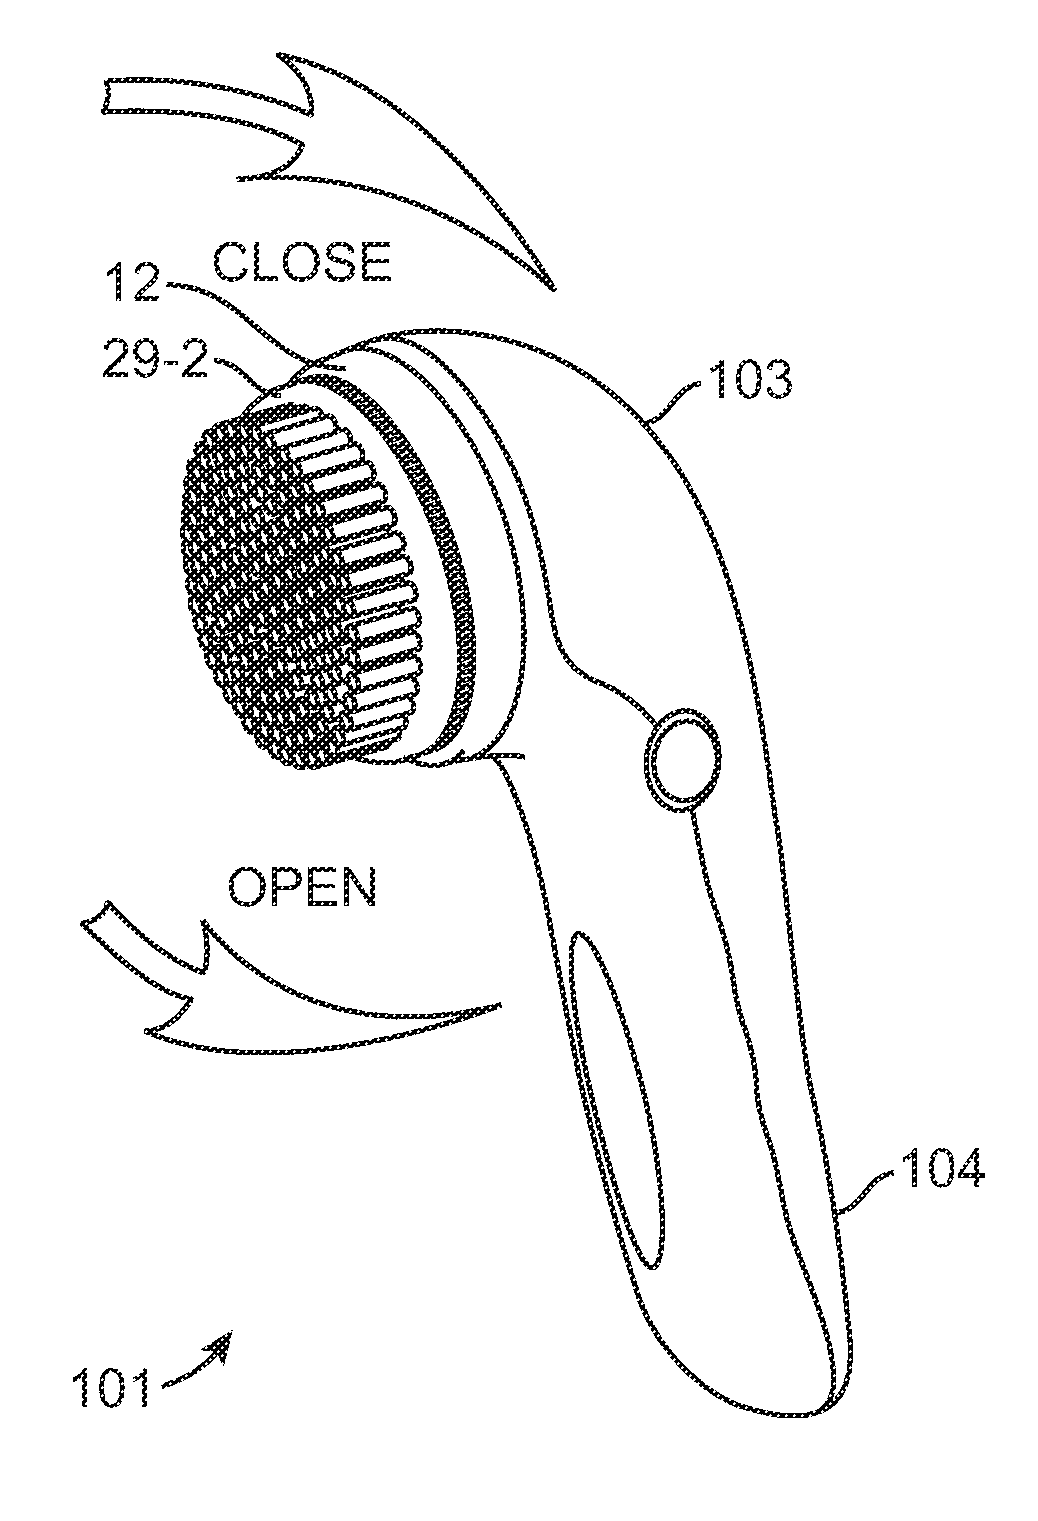 Automated hair removal device